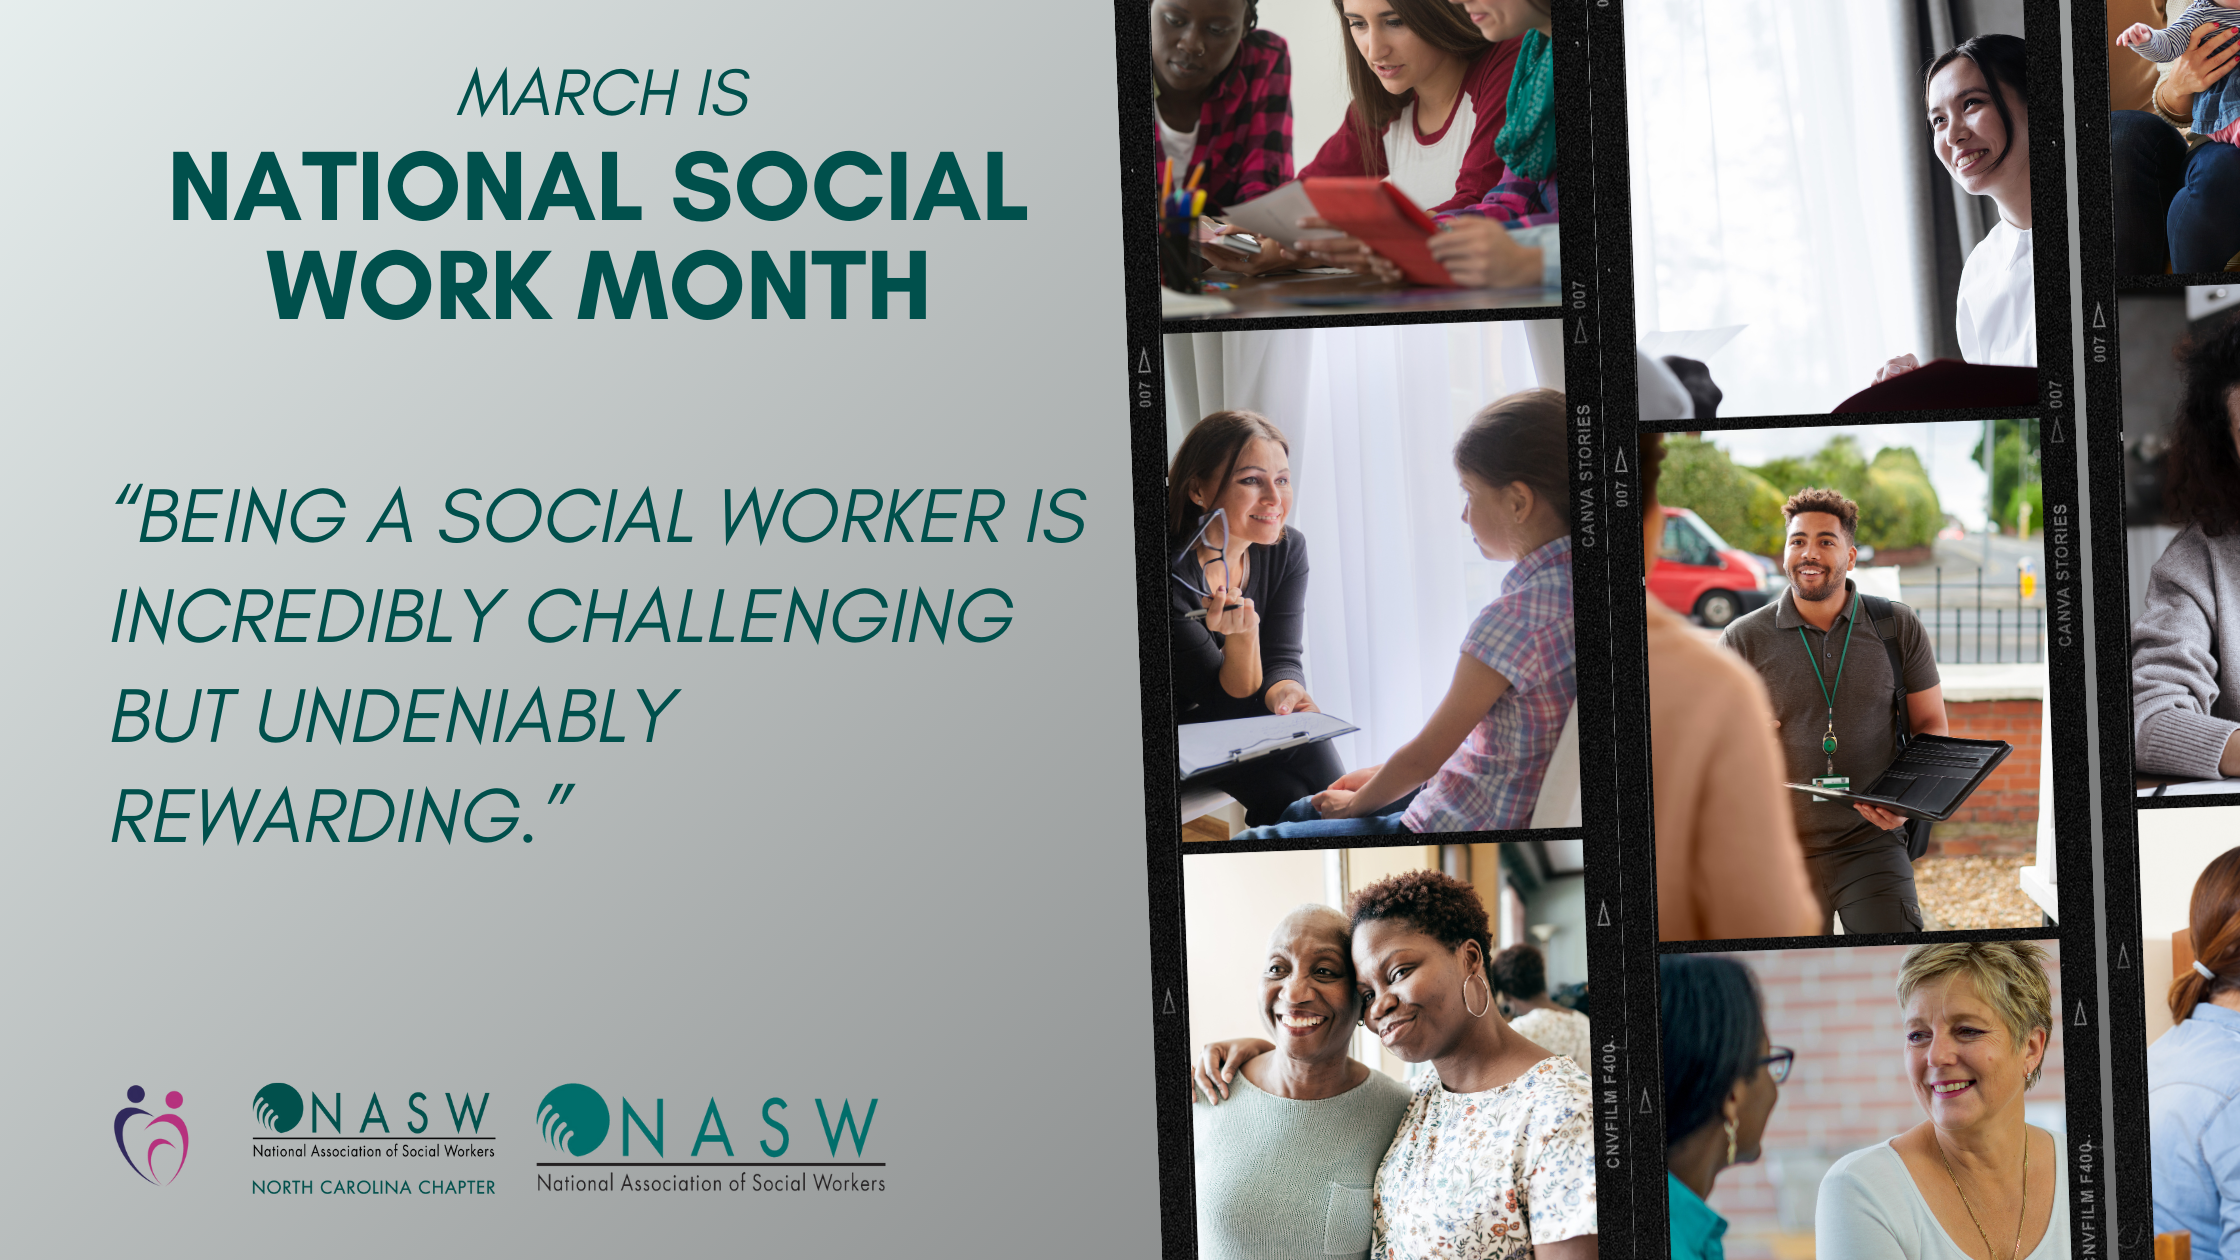 March is National Social Work month. Quote is Being a social worker is incredibly challenging but undeniably rewarding. InterAct and National Social Work Organization logos.